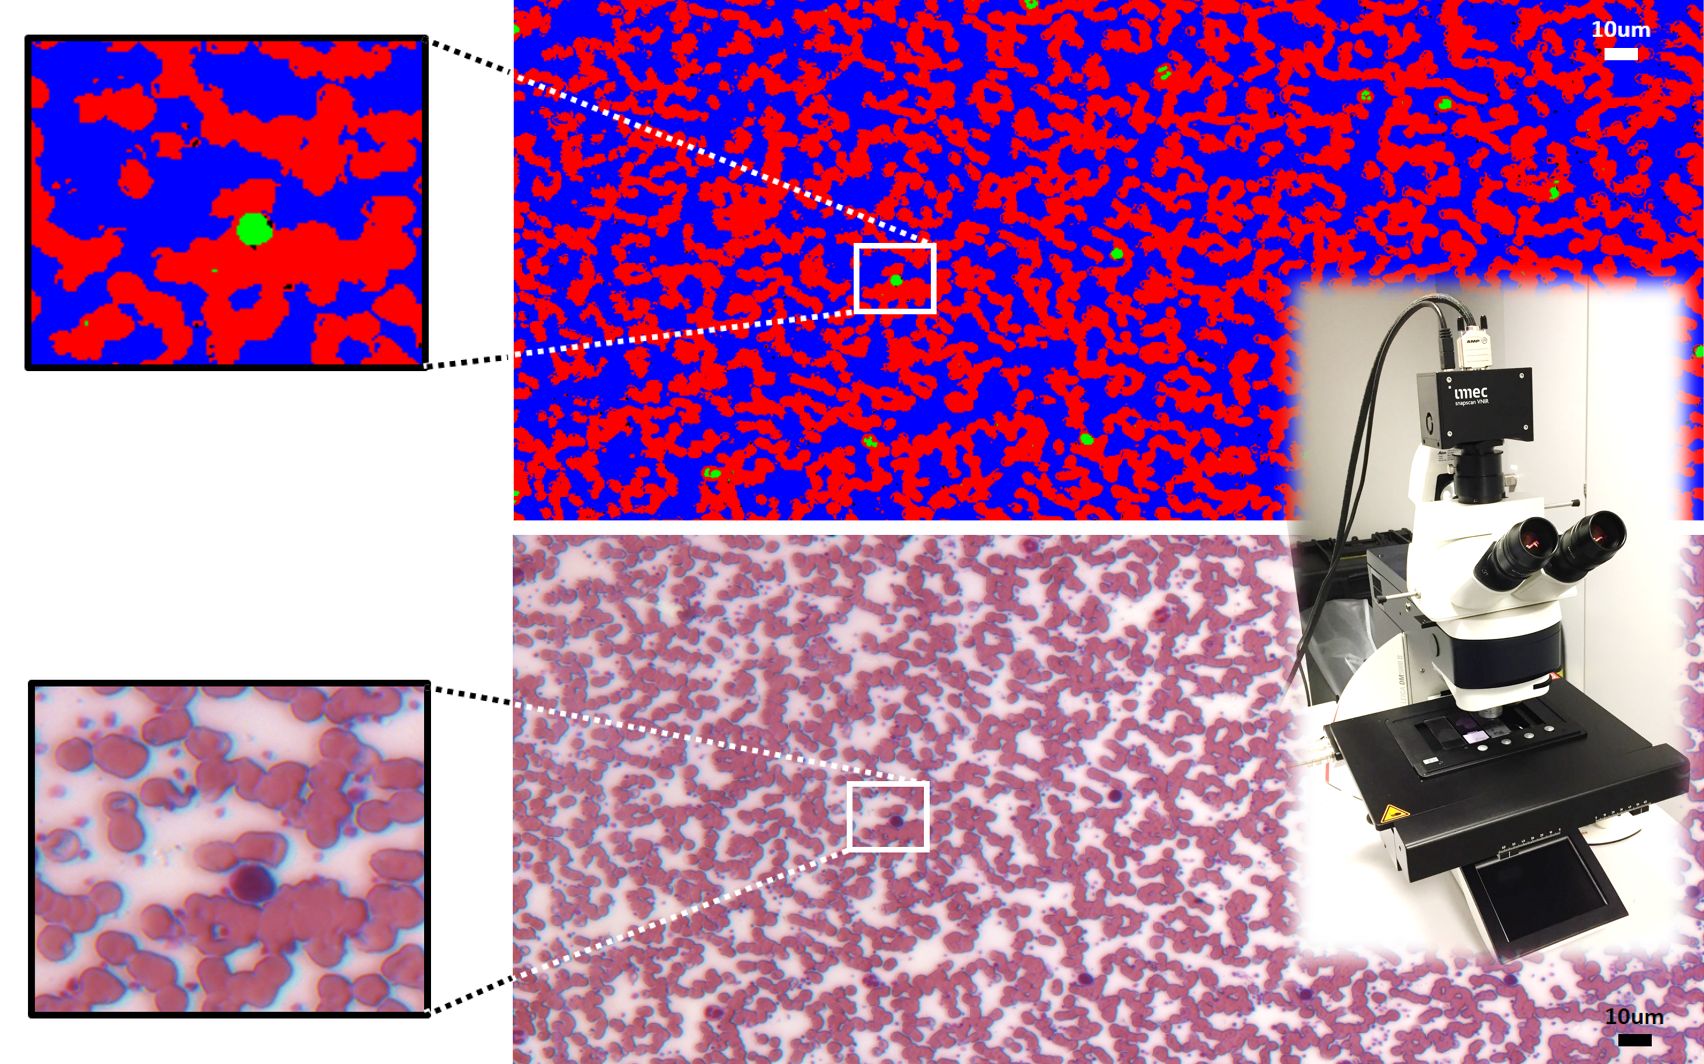 RGB rendering and classified image (red blood cells versus white blood cells) from a dataset of 150 spectral images of 7Mpx spatial resolution (snapscan VNIR camera was mounted onto a LEICA microscope for spectral imaging of a blood smear test